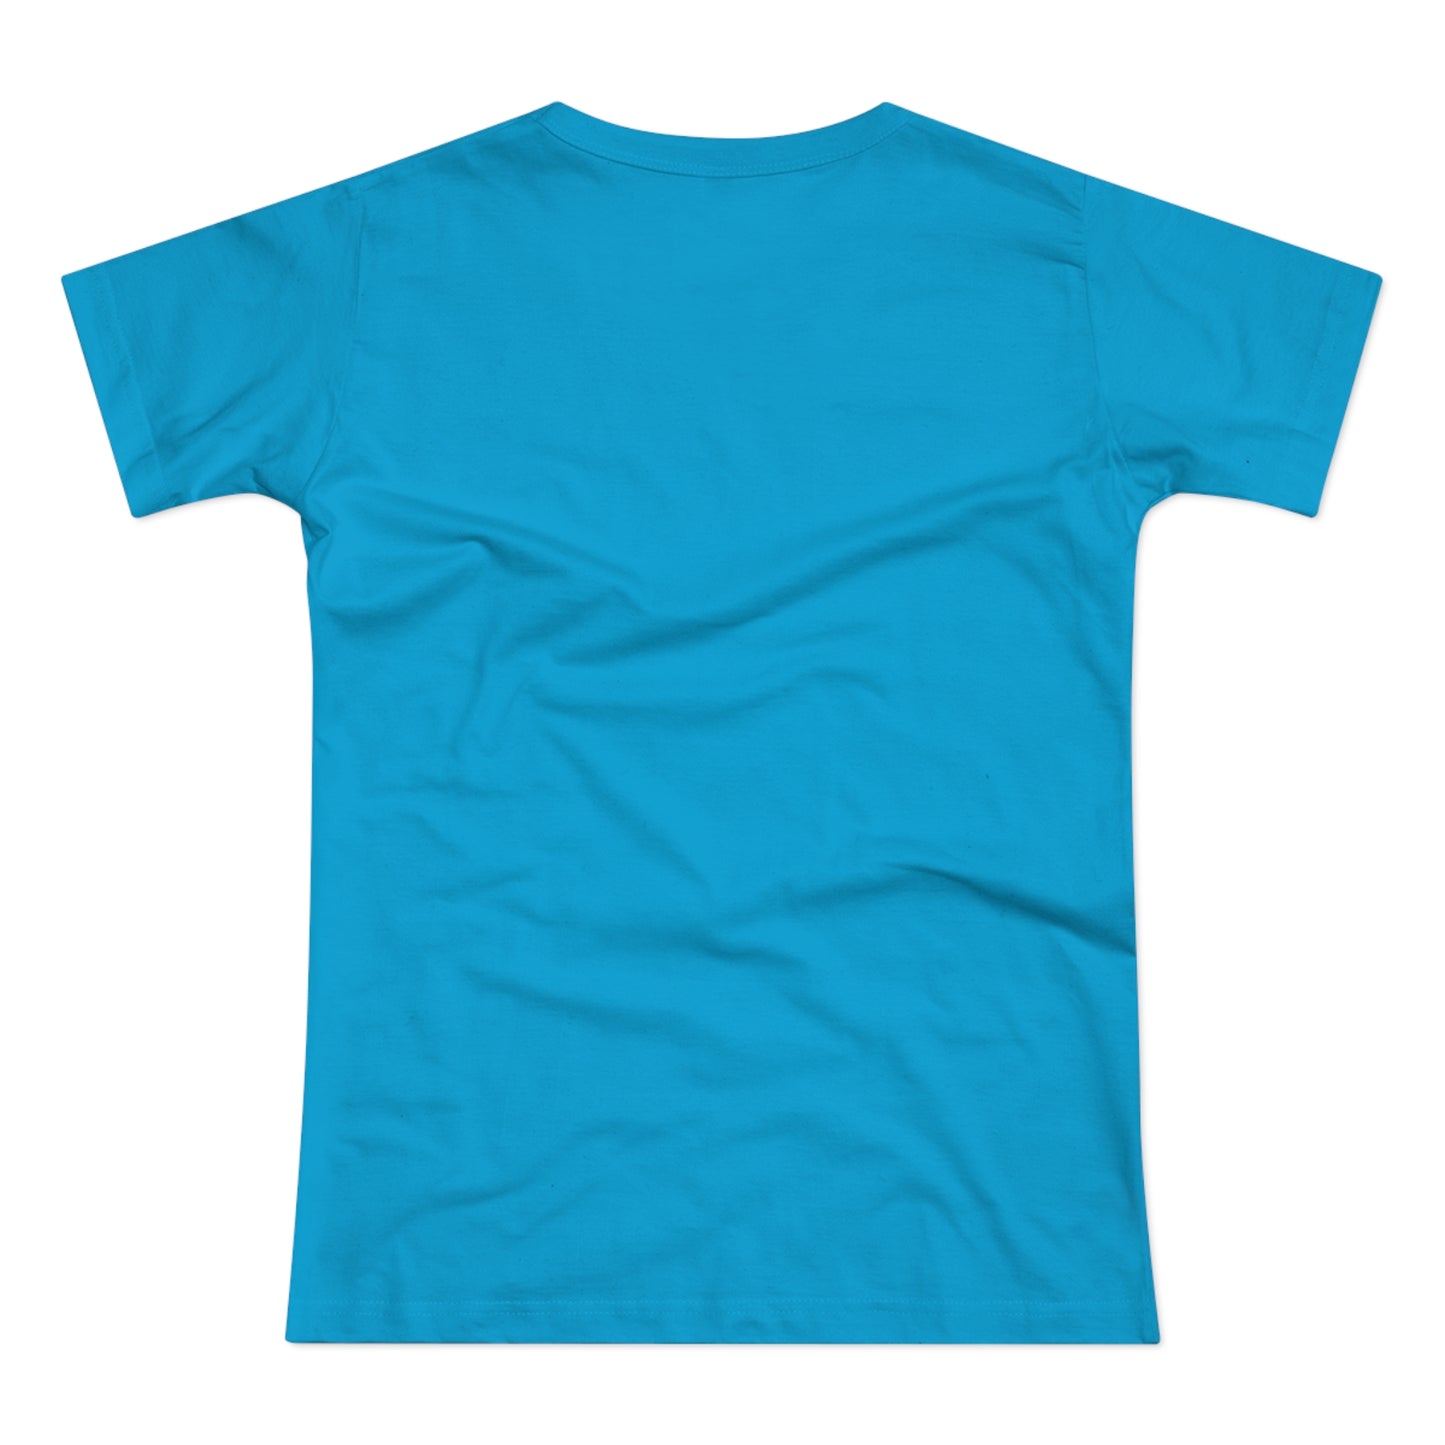 a blue t - shirt on a white background